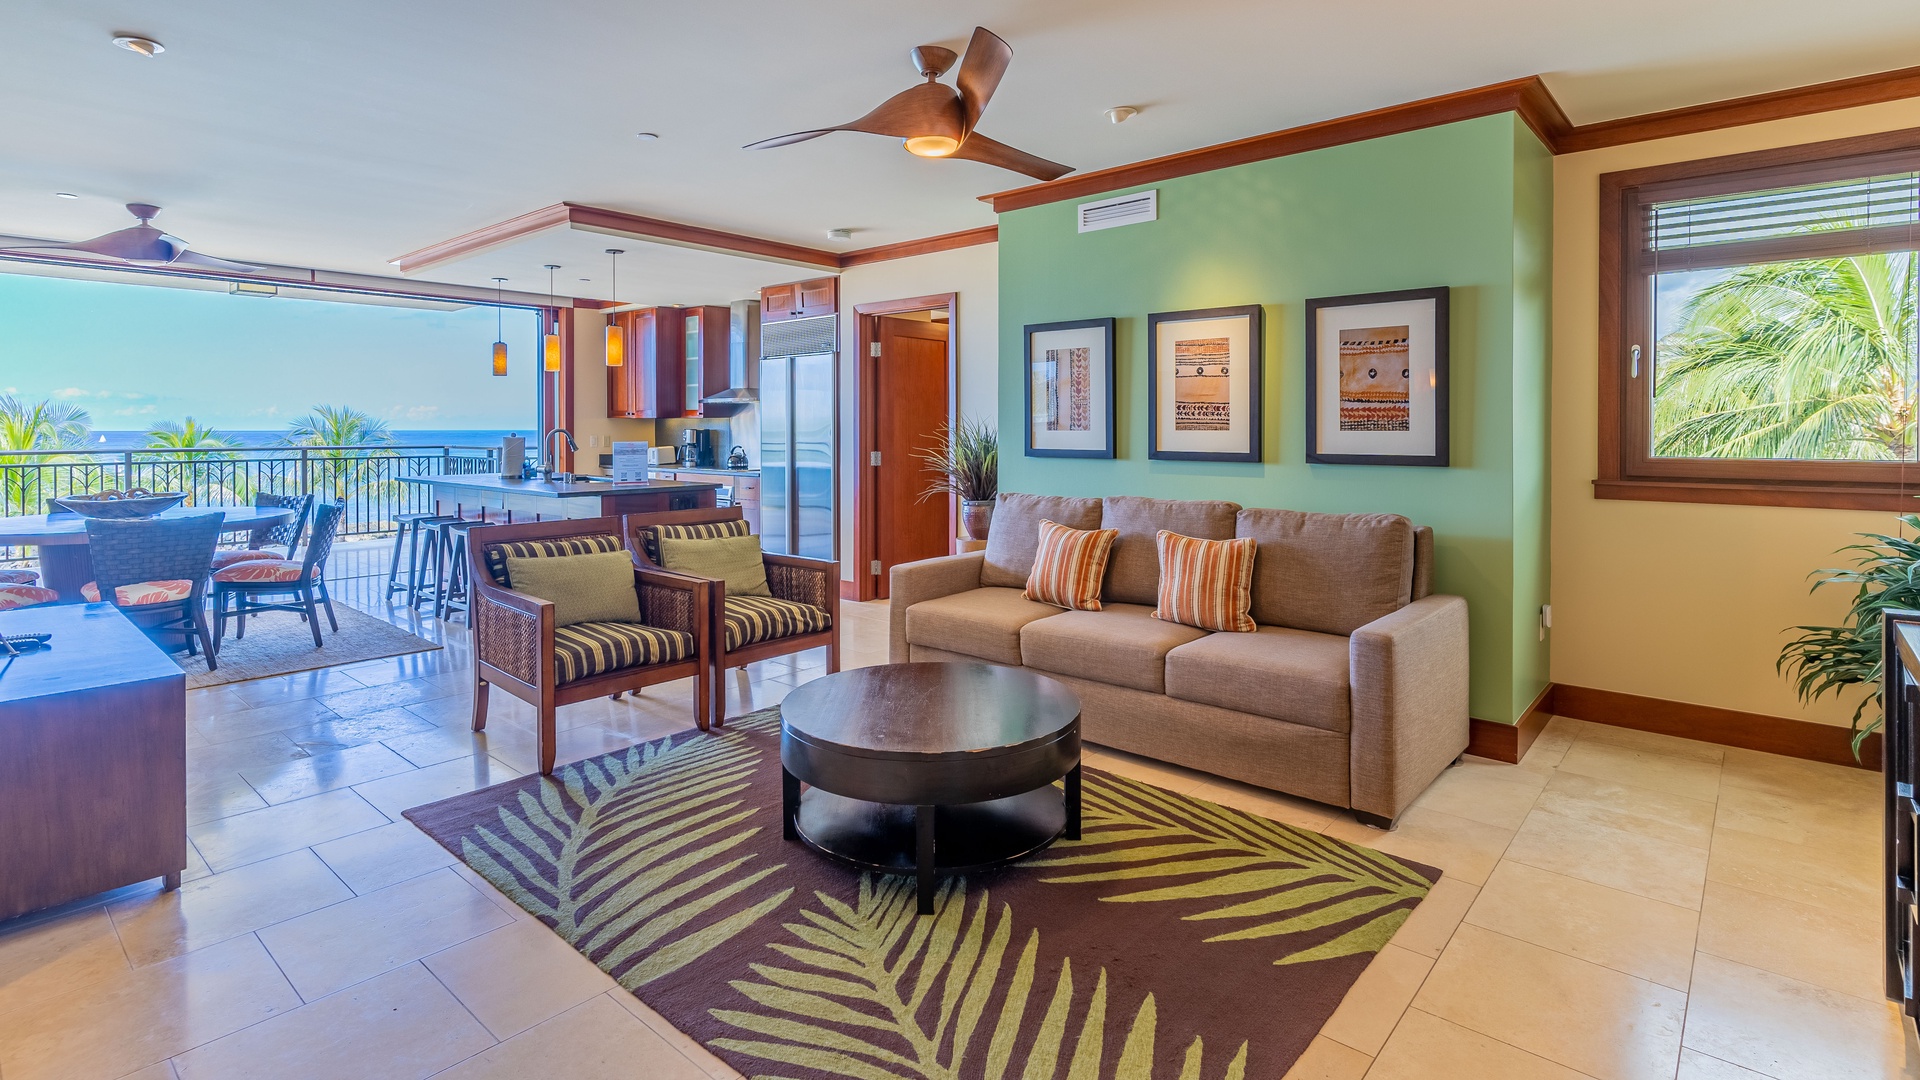 Kapolei Vacation Rentals, Ko Olina Beach Villas B410 - Relax and bring your favorite book or enjoy a movie night.